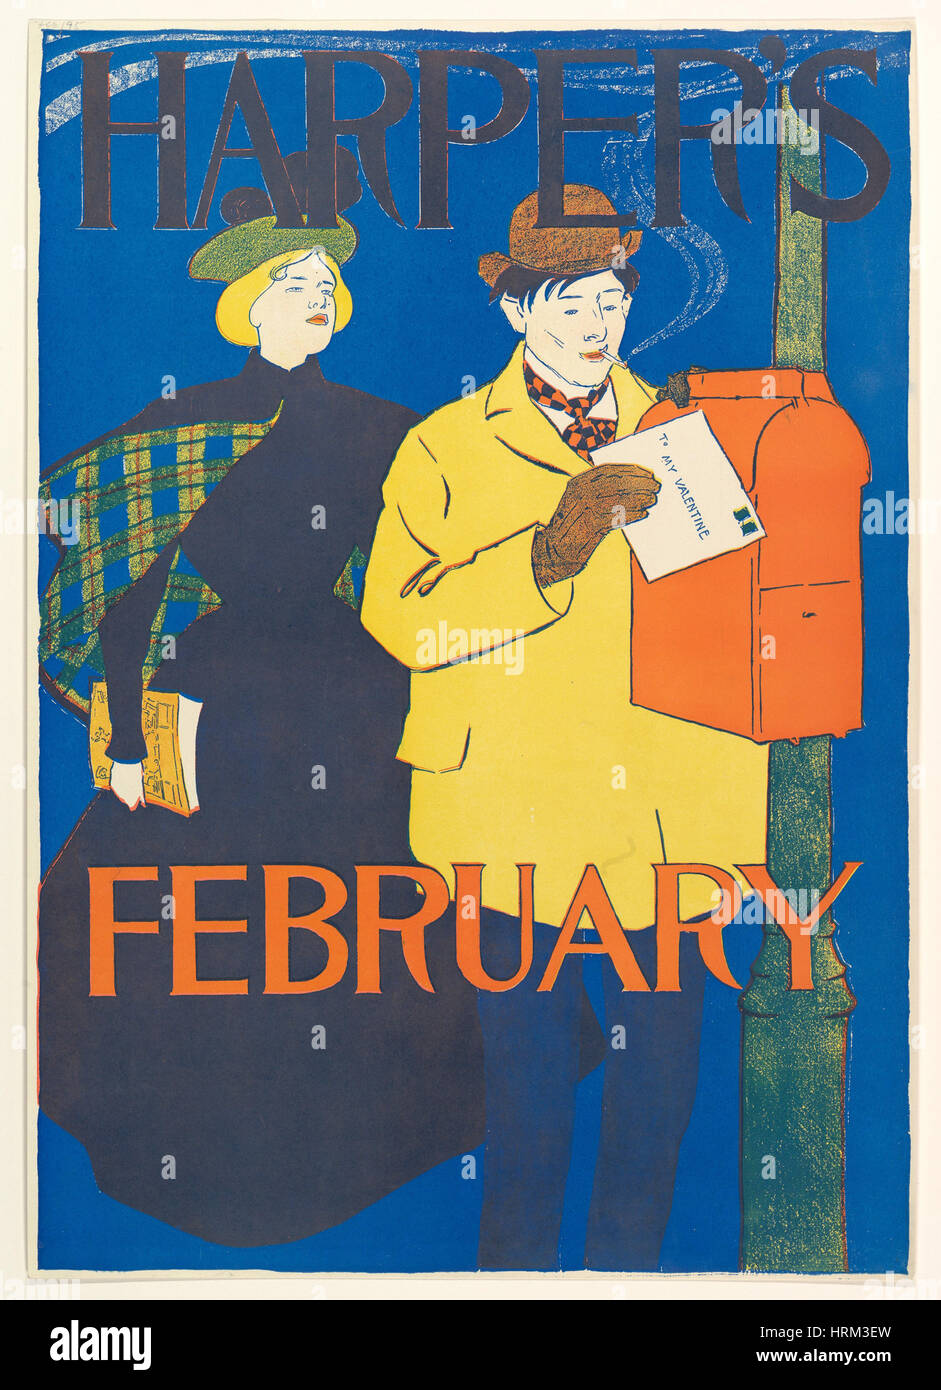 Harpers February by Edward Penfiled Stock Photo